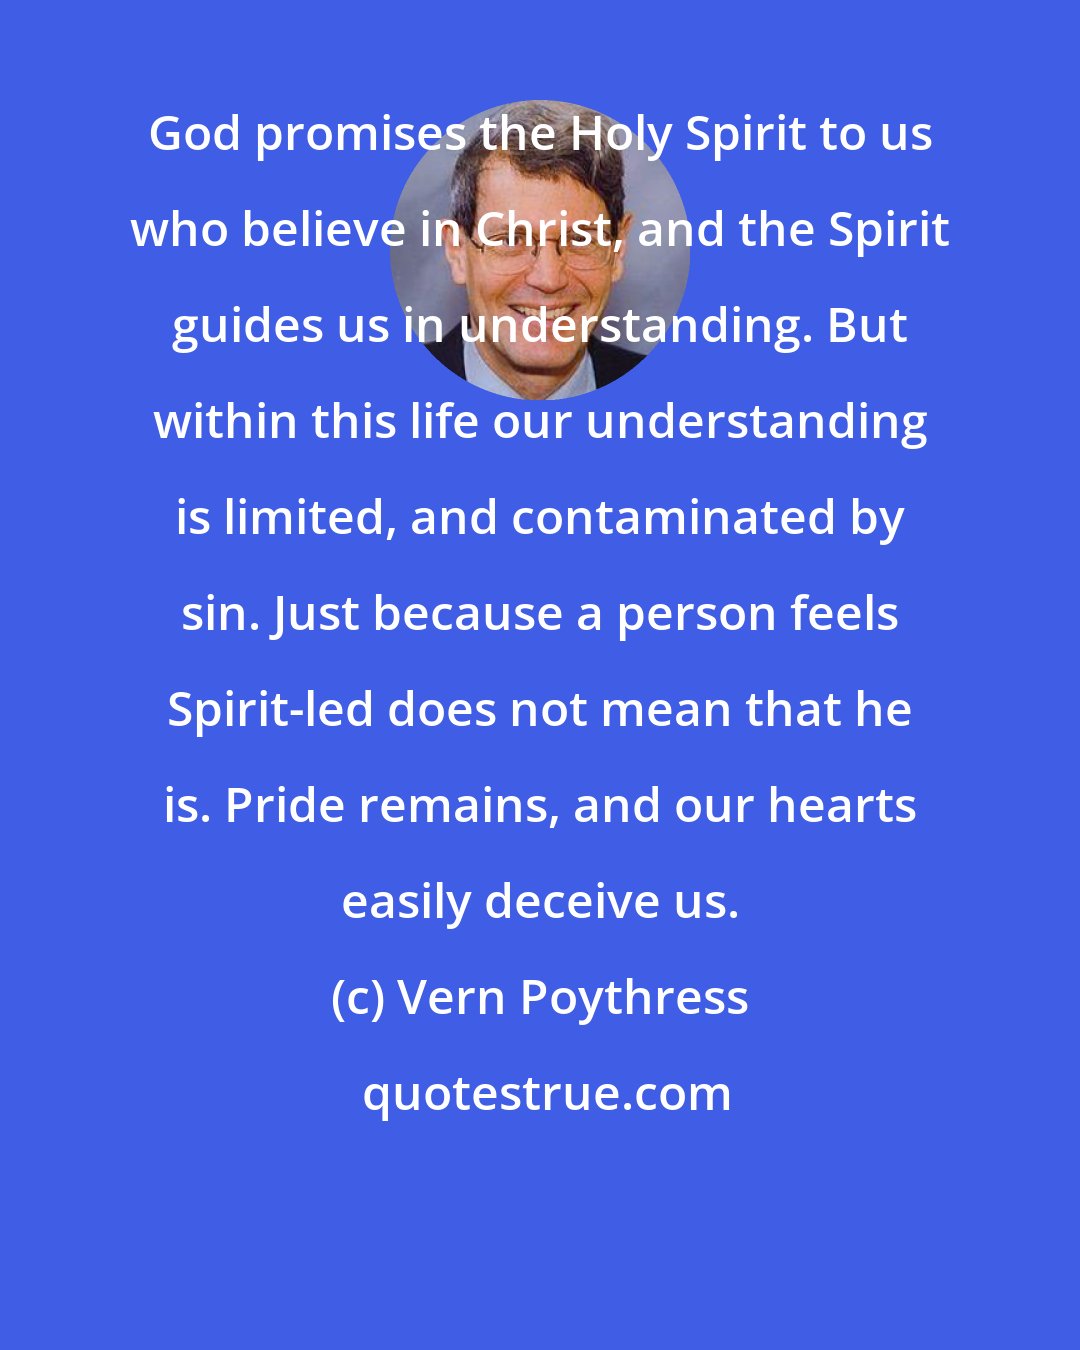 Vern Poythress: God promises the Holy Spirit to us who believe in Christ, and the Spirit guides us in understanding. But within this life our understanding is limited, and contaminated by sin. Just because a person feels Spirit-led does not mean that he is. Pride remains, and our hearts easily deceive us.